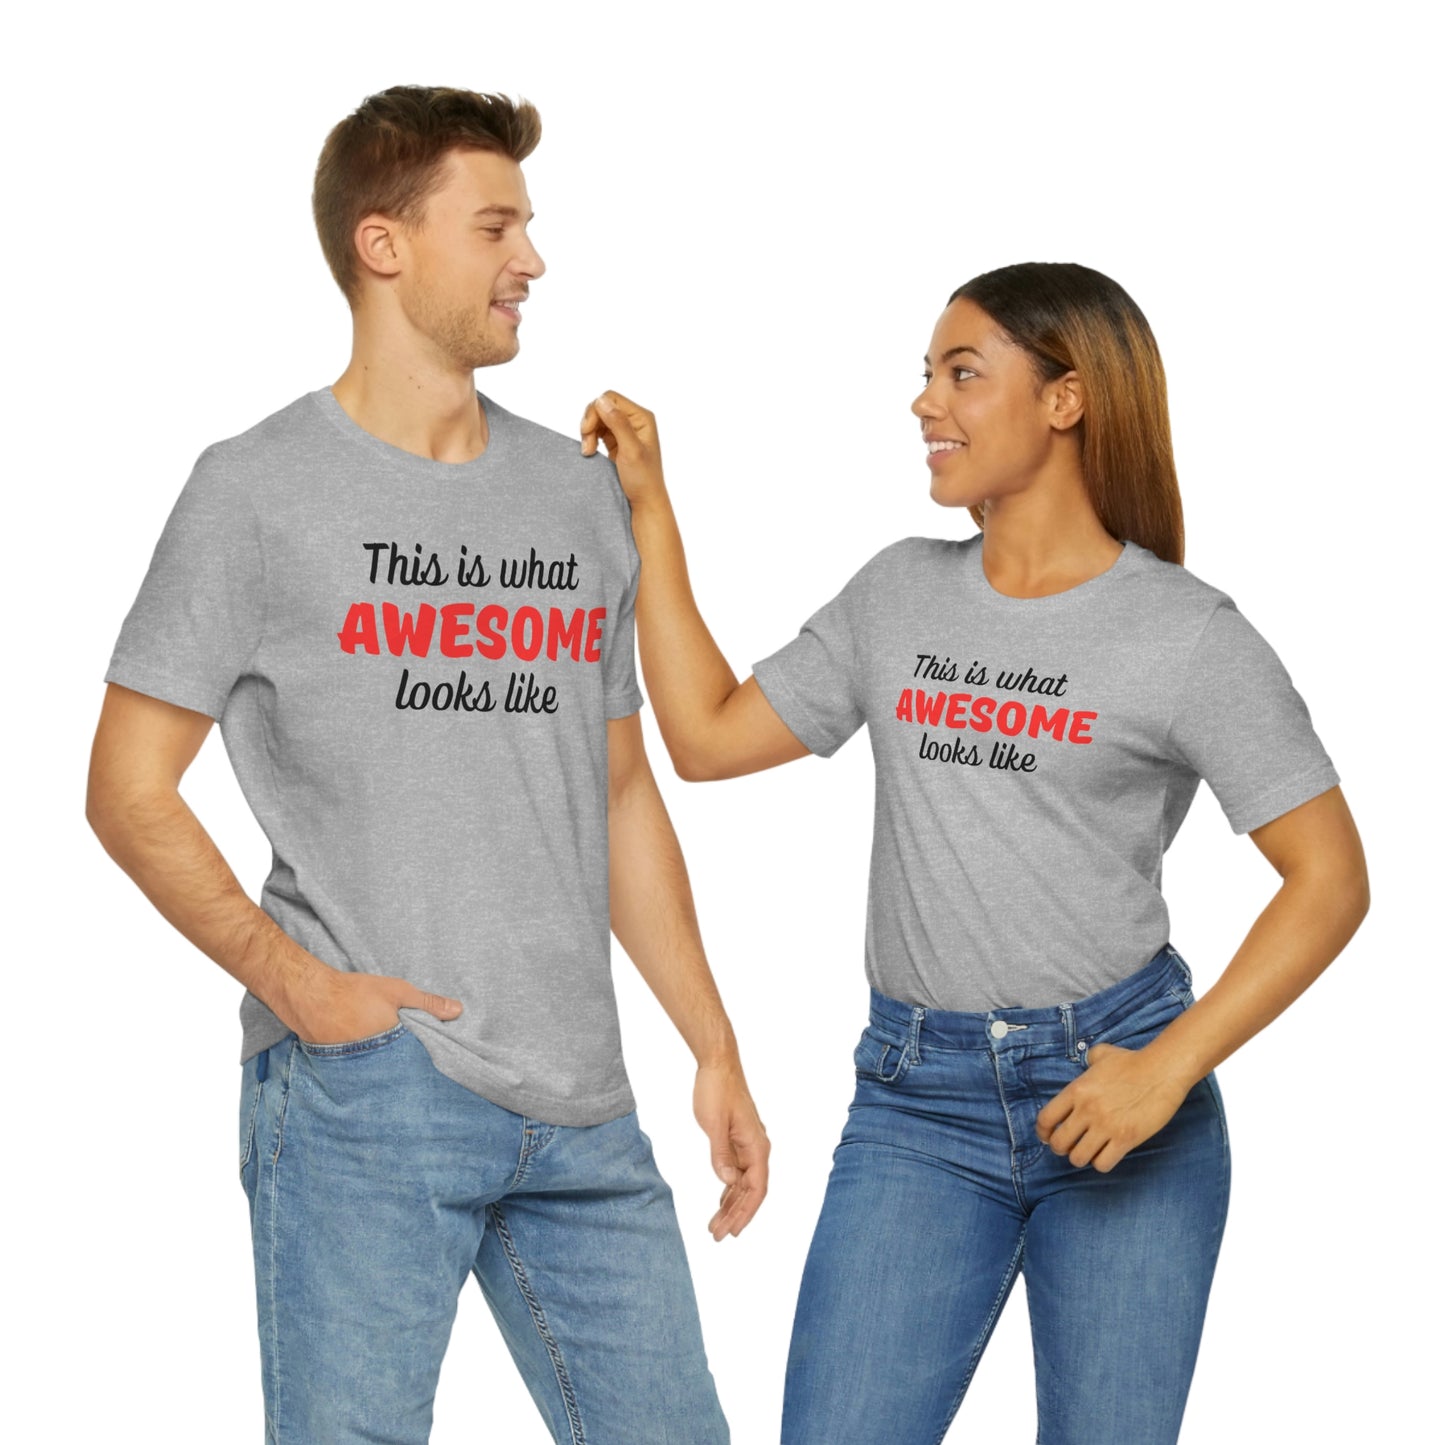 This is what Awesome looks like Unisex Jersey Short Sleeve Tee